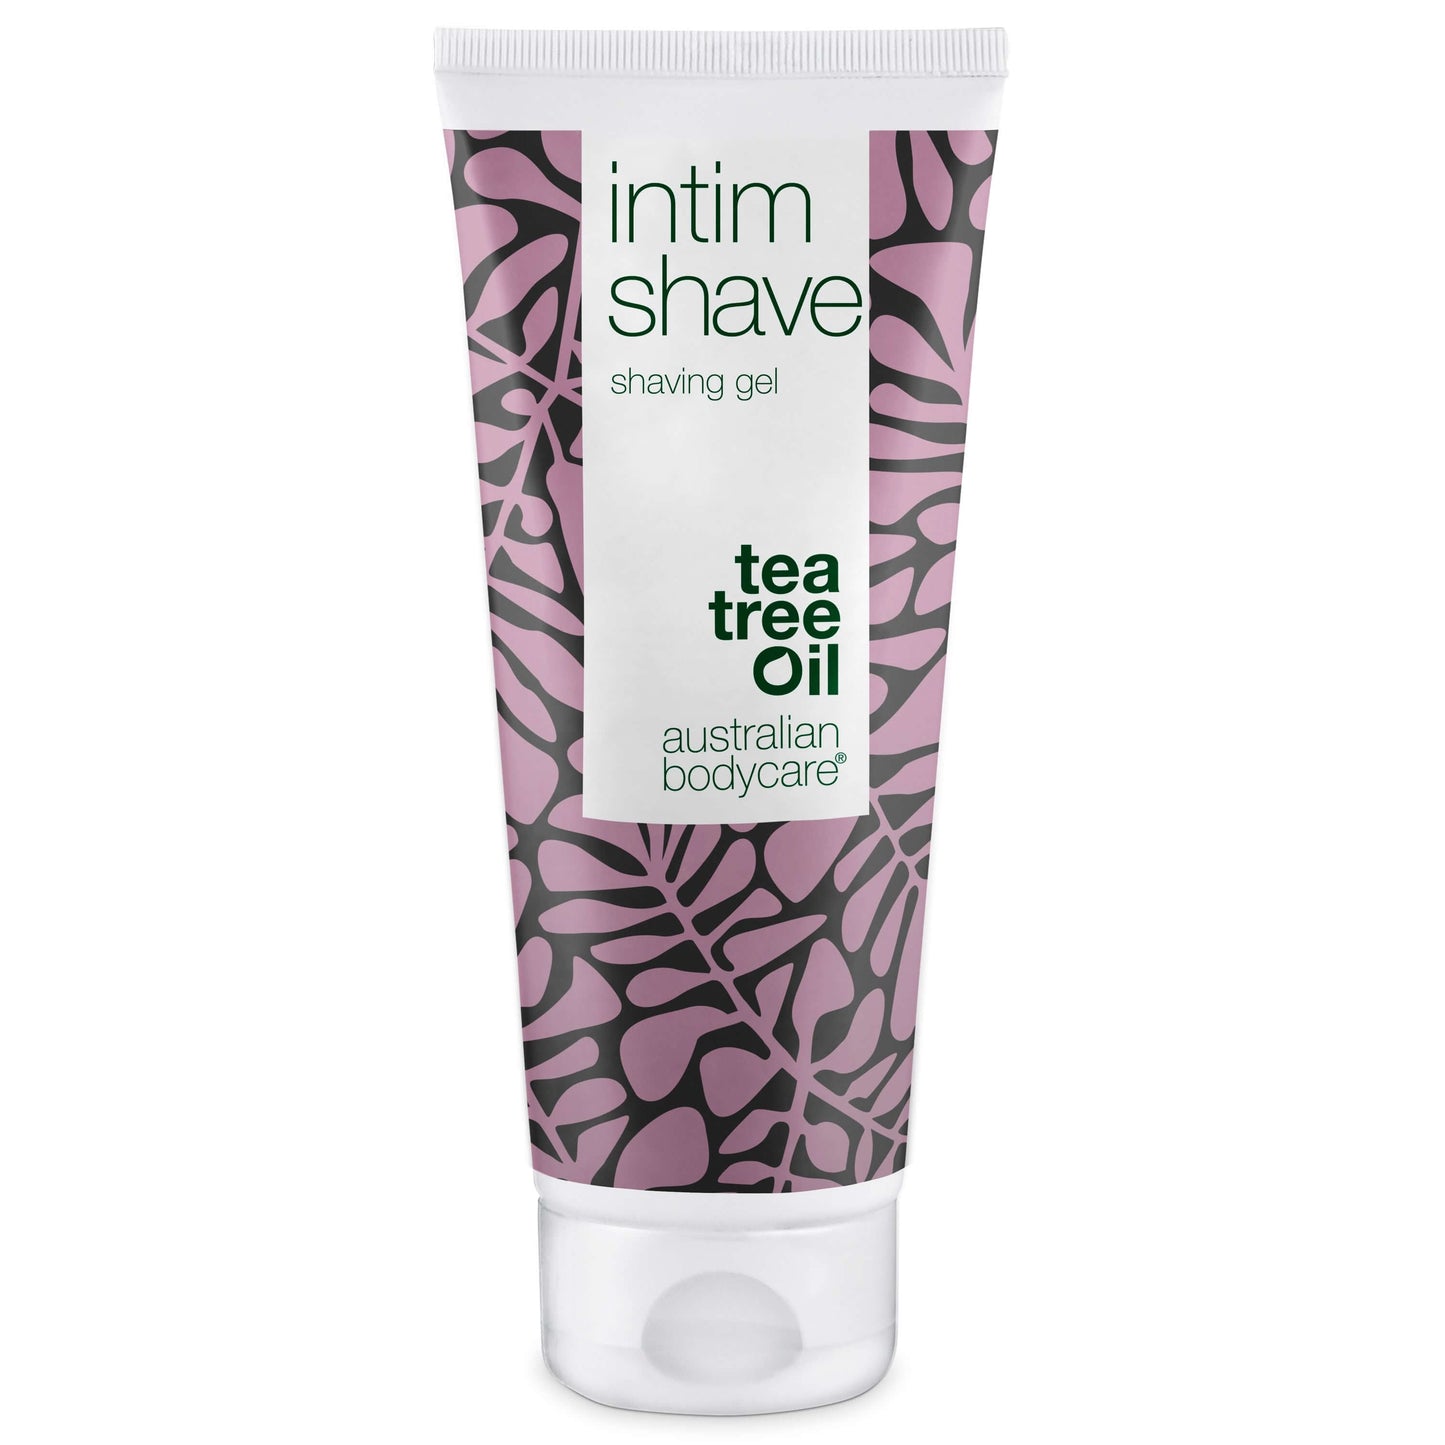 Intimate shaving gel against razor burn and ingrown hair - Shaving gel for the removal of pubic hair fights irritation and razor bumps